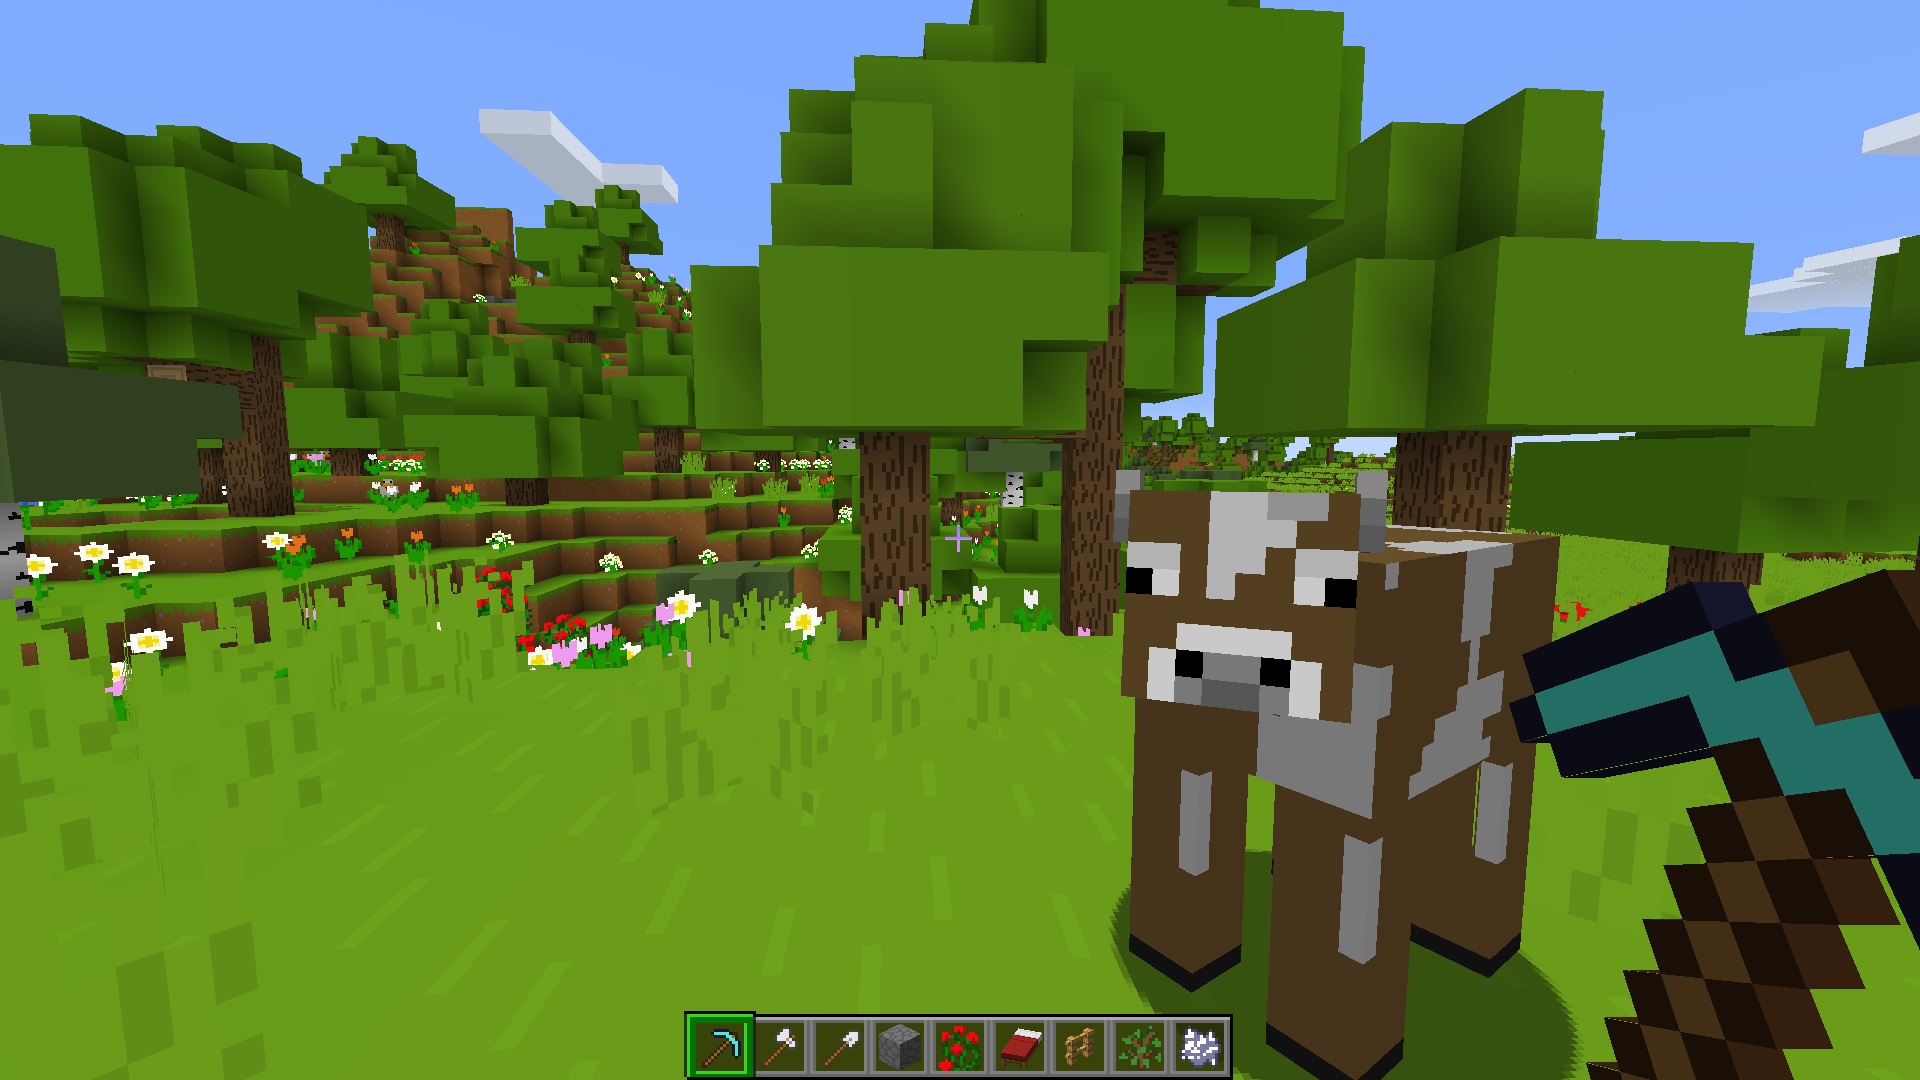 Minecraft texture pack - Bare Bones - A cow with simplified colors stands in front of trees with flat green leaf block textures